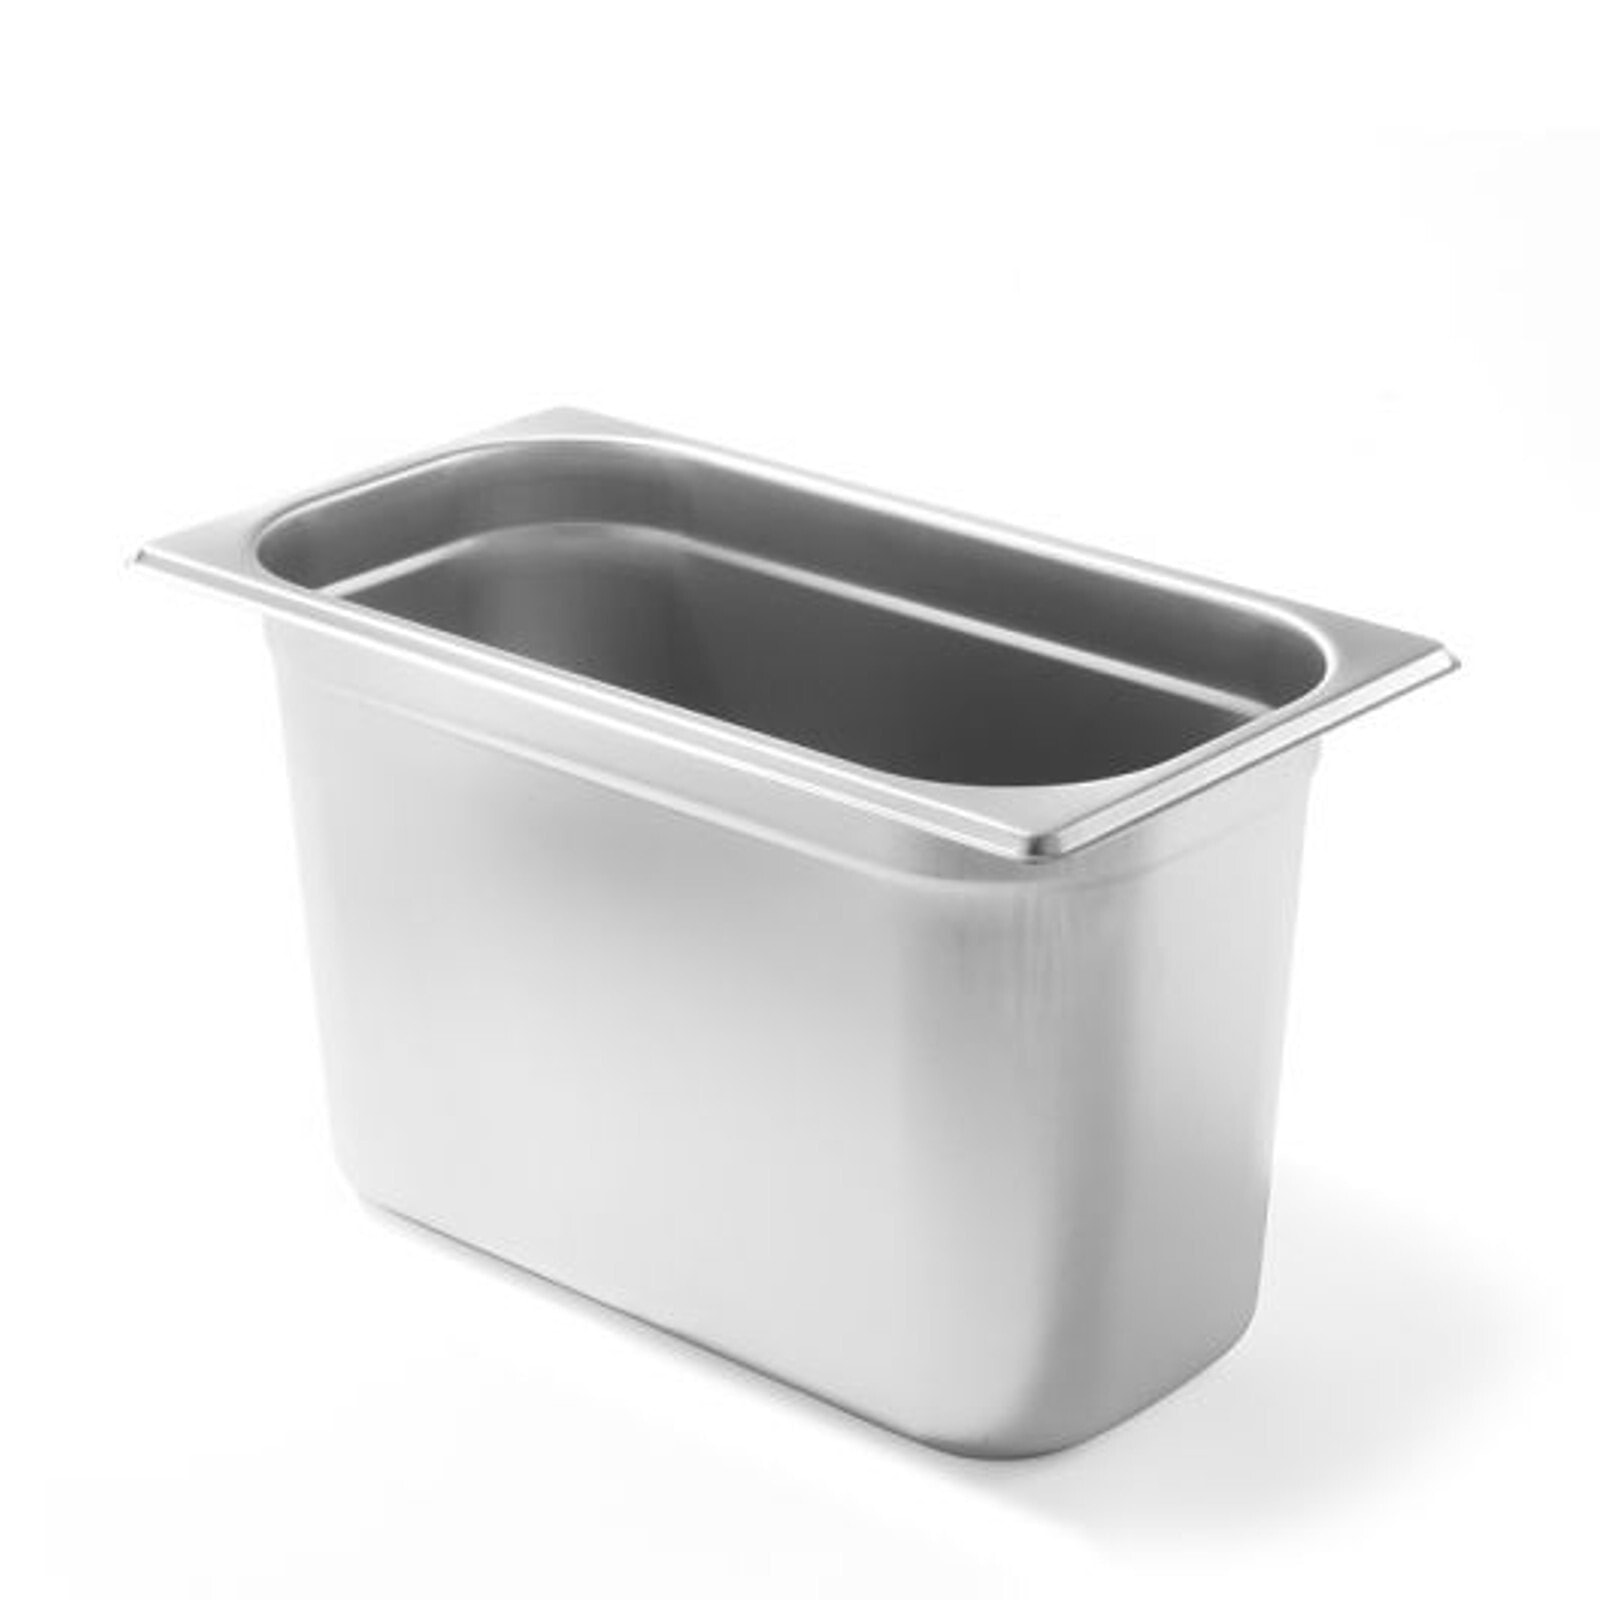 GN container 1/3, height 150 mm, made of stainless steel - Hendi 800447